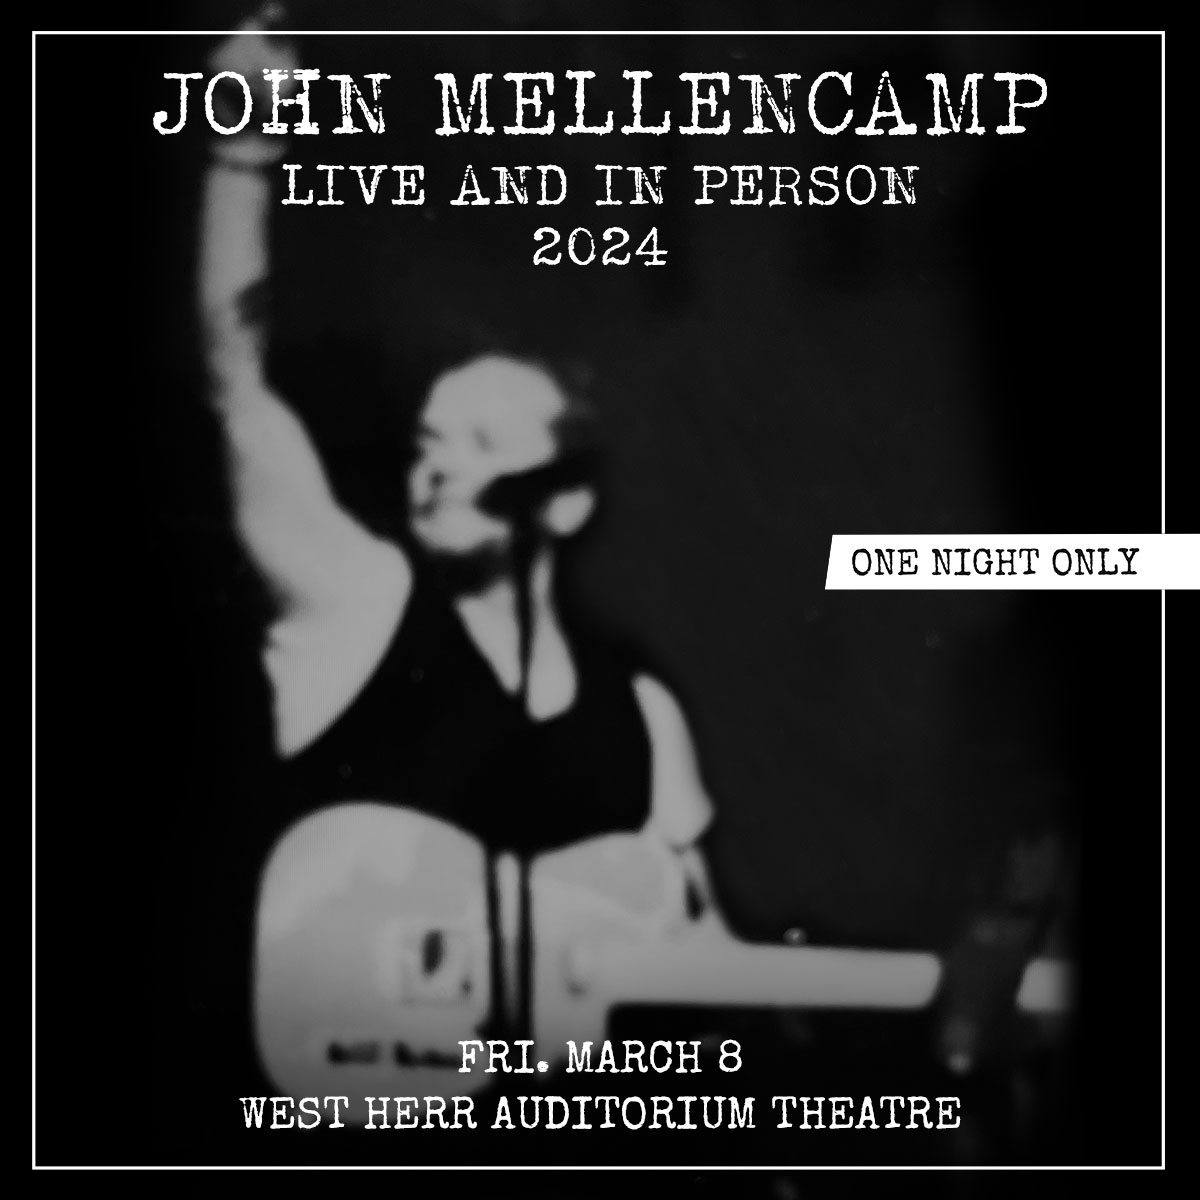 Listen with Tony and Kristie all week to win last chance tickets to @johnmellencamp at @RBTLAud on March 8th🎟